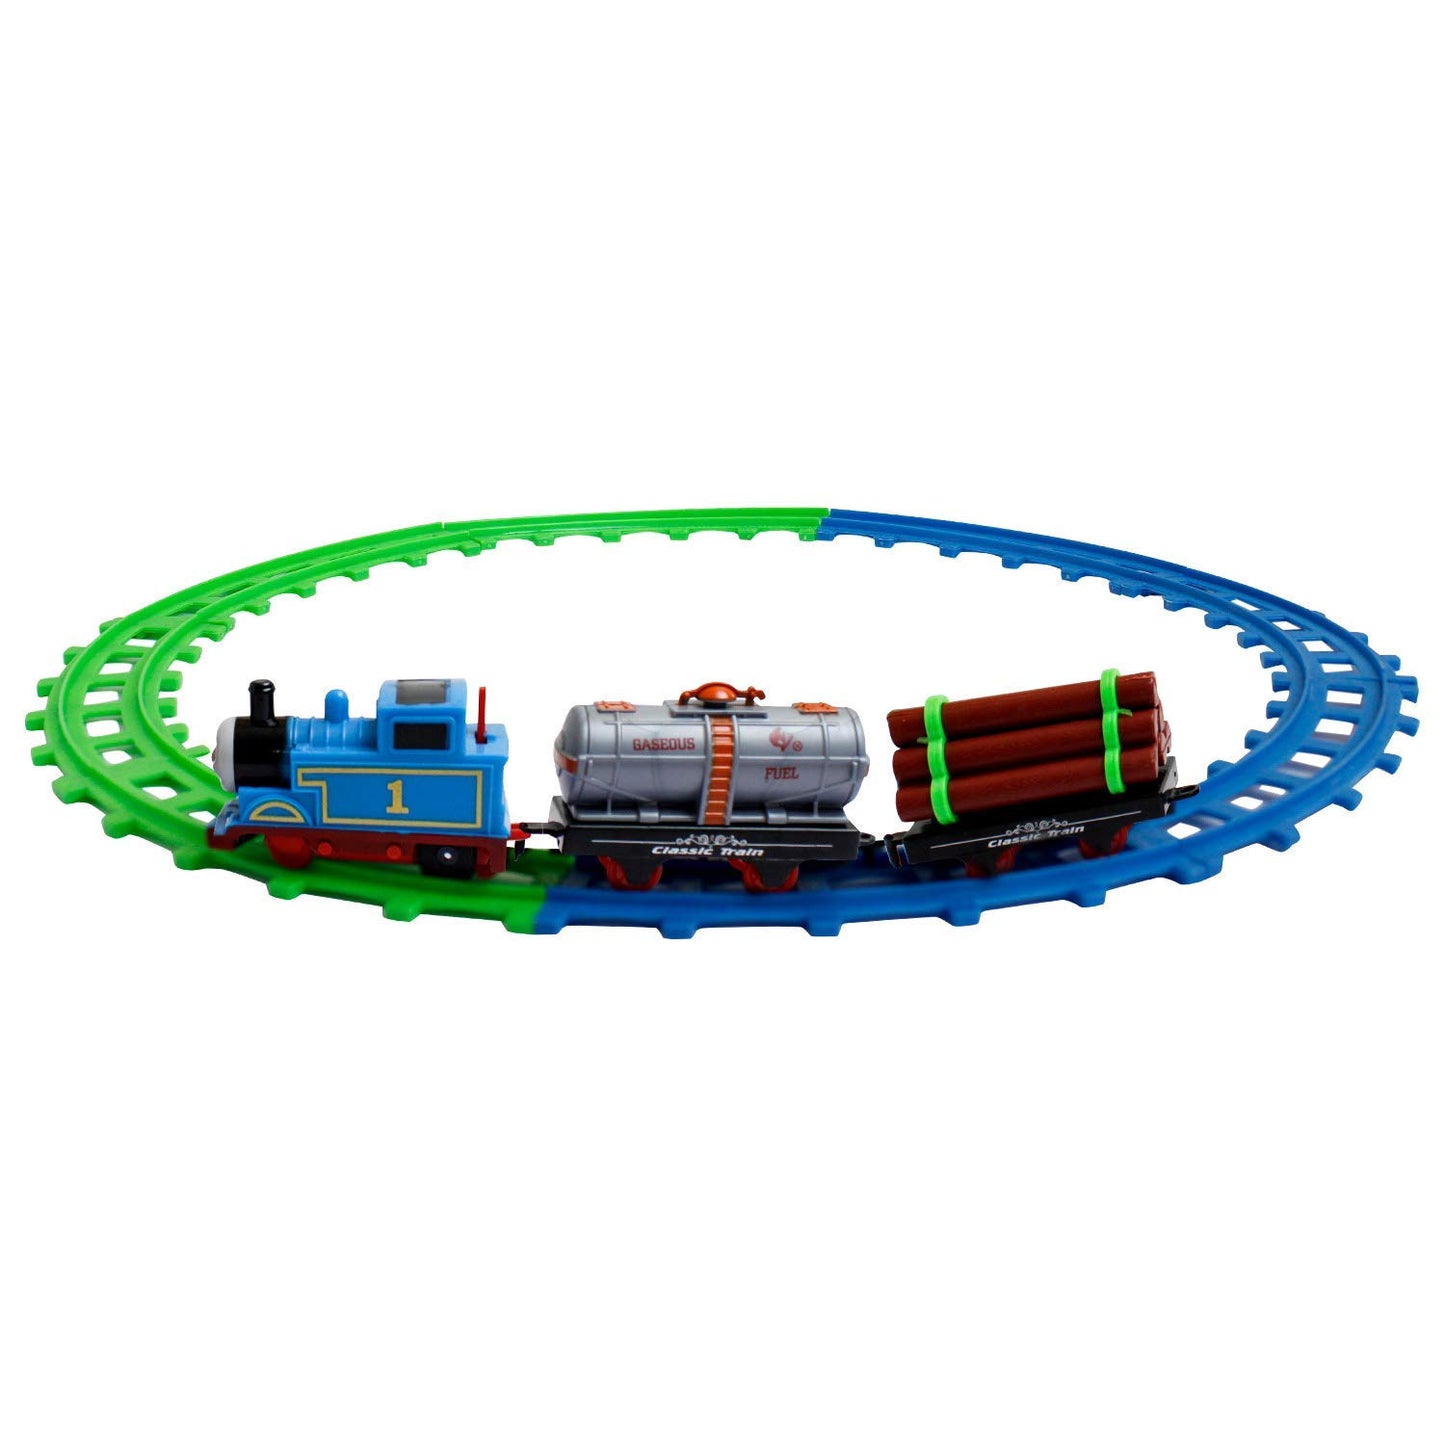 Thomas Cartoon Train Track Set Toy for Kids (Multicolor, Pack of: 1)